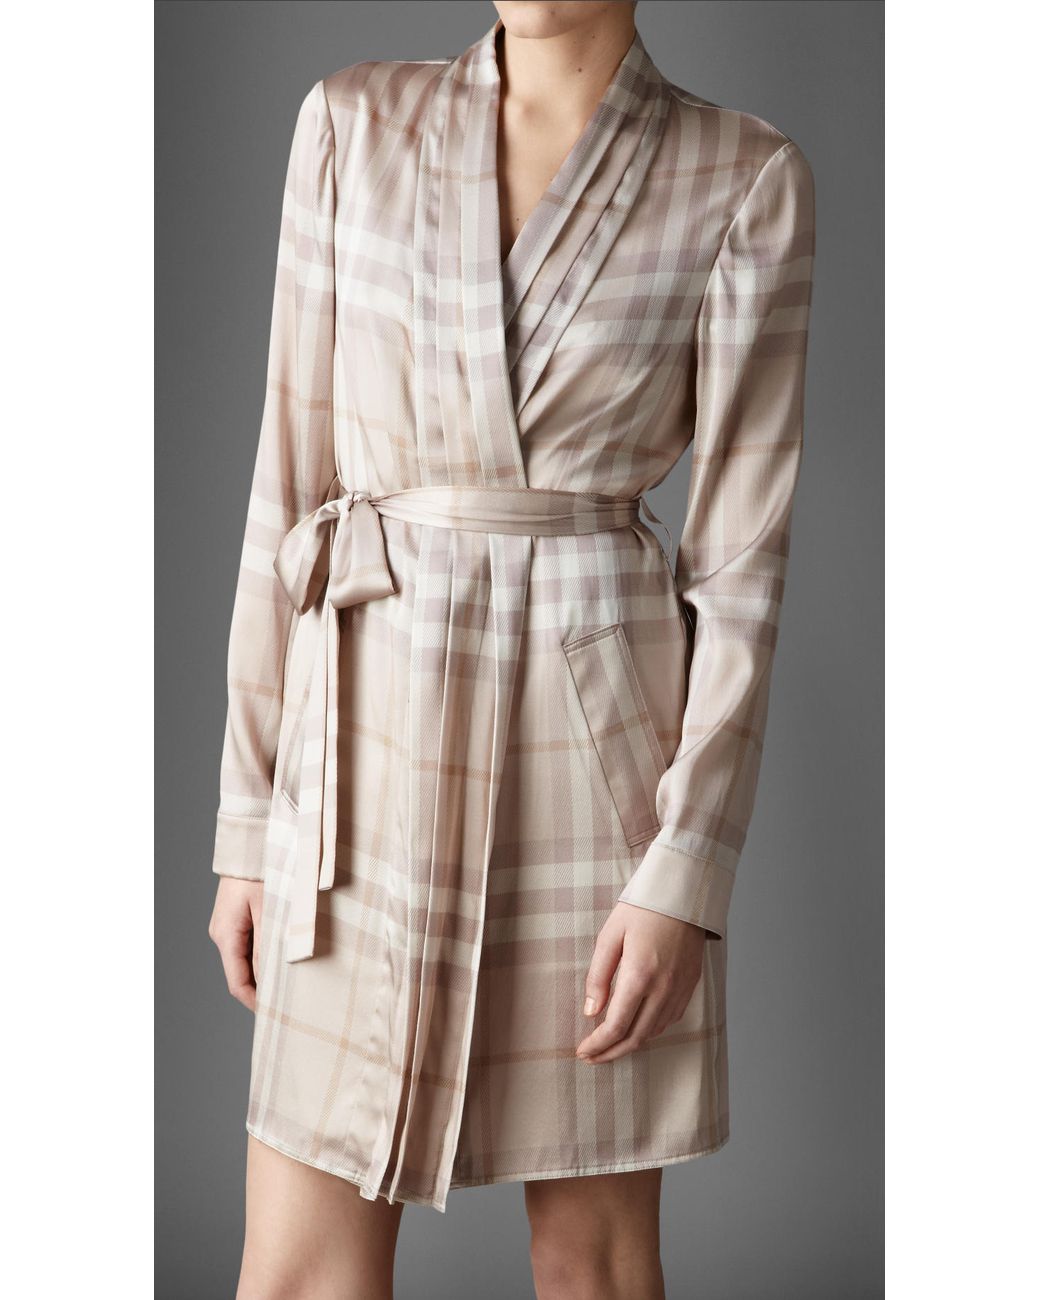 Burberry Check Stretchsilk Dressing Gown in Natural | Lyst